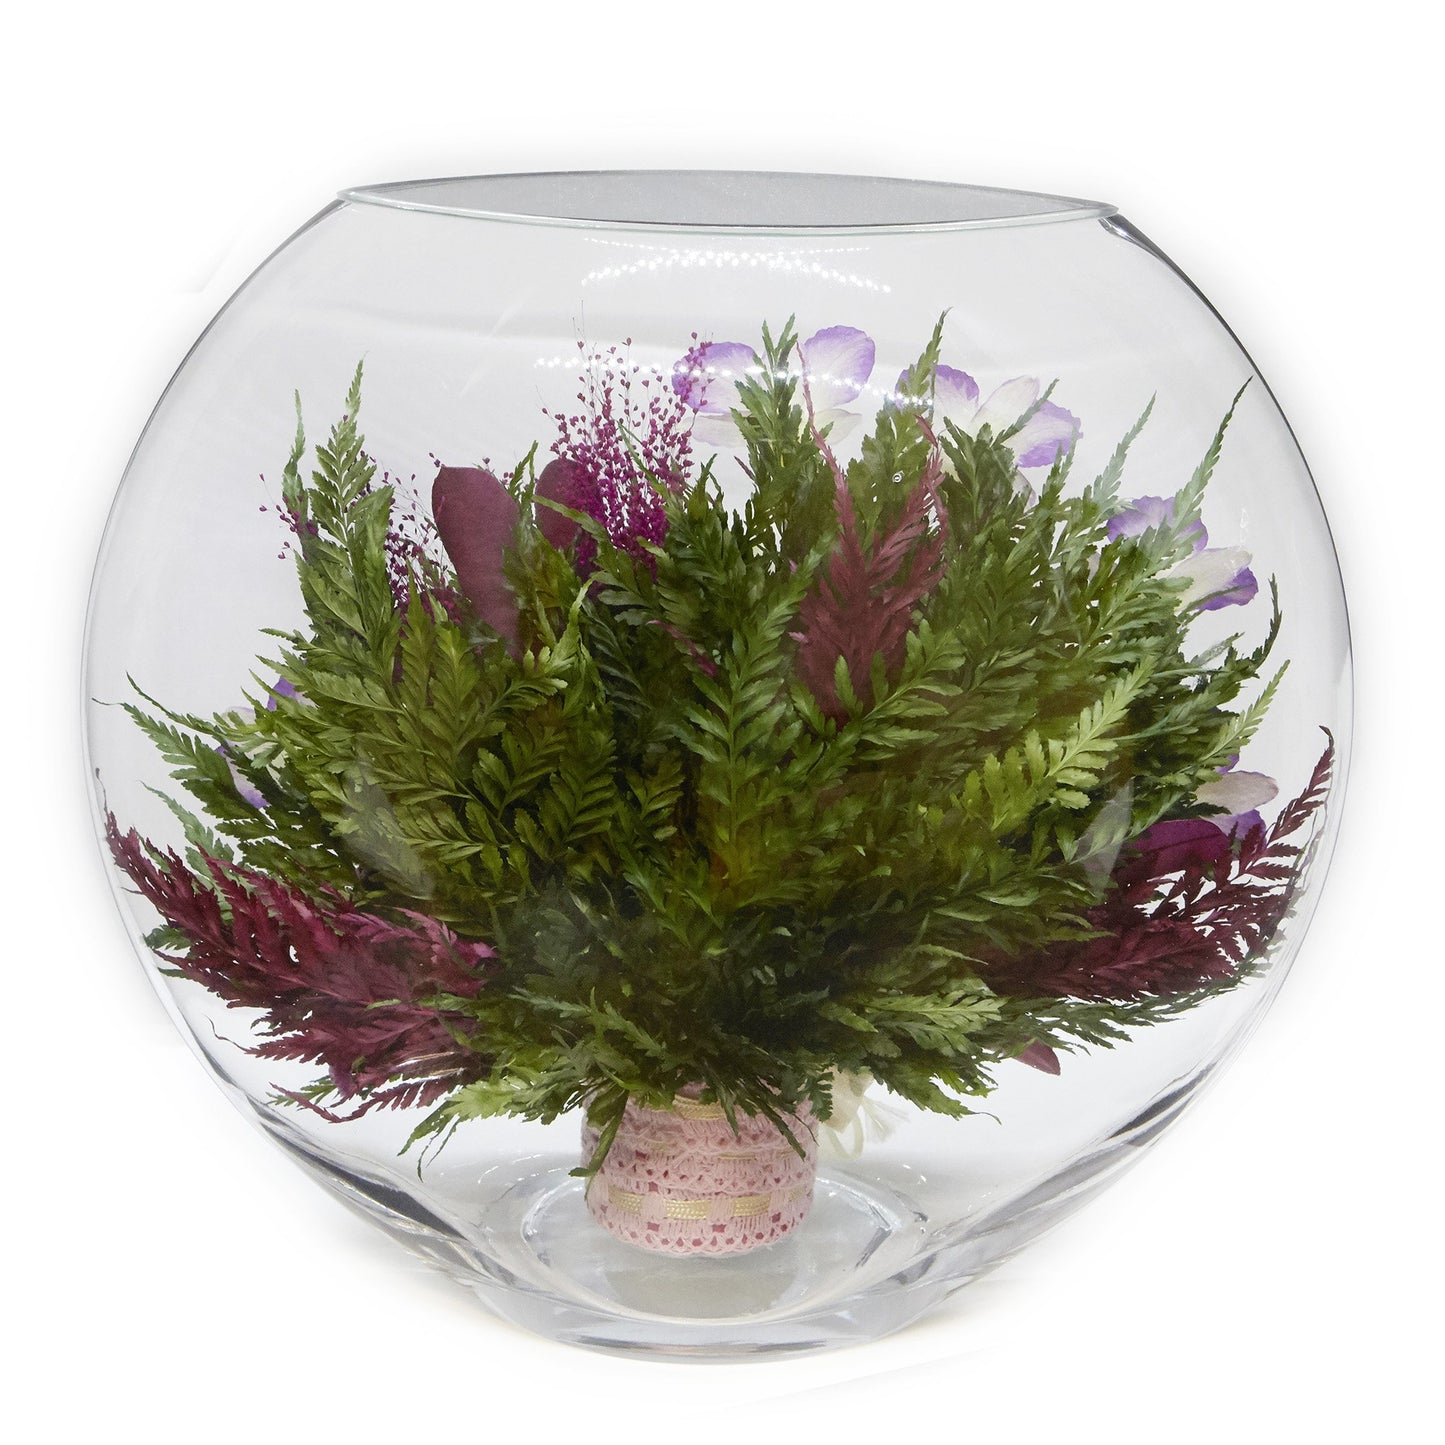 43918 Long-Lasting Orchids in a Large Glass Vase - FIORA FLOWER